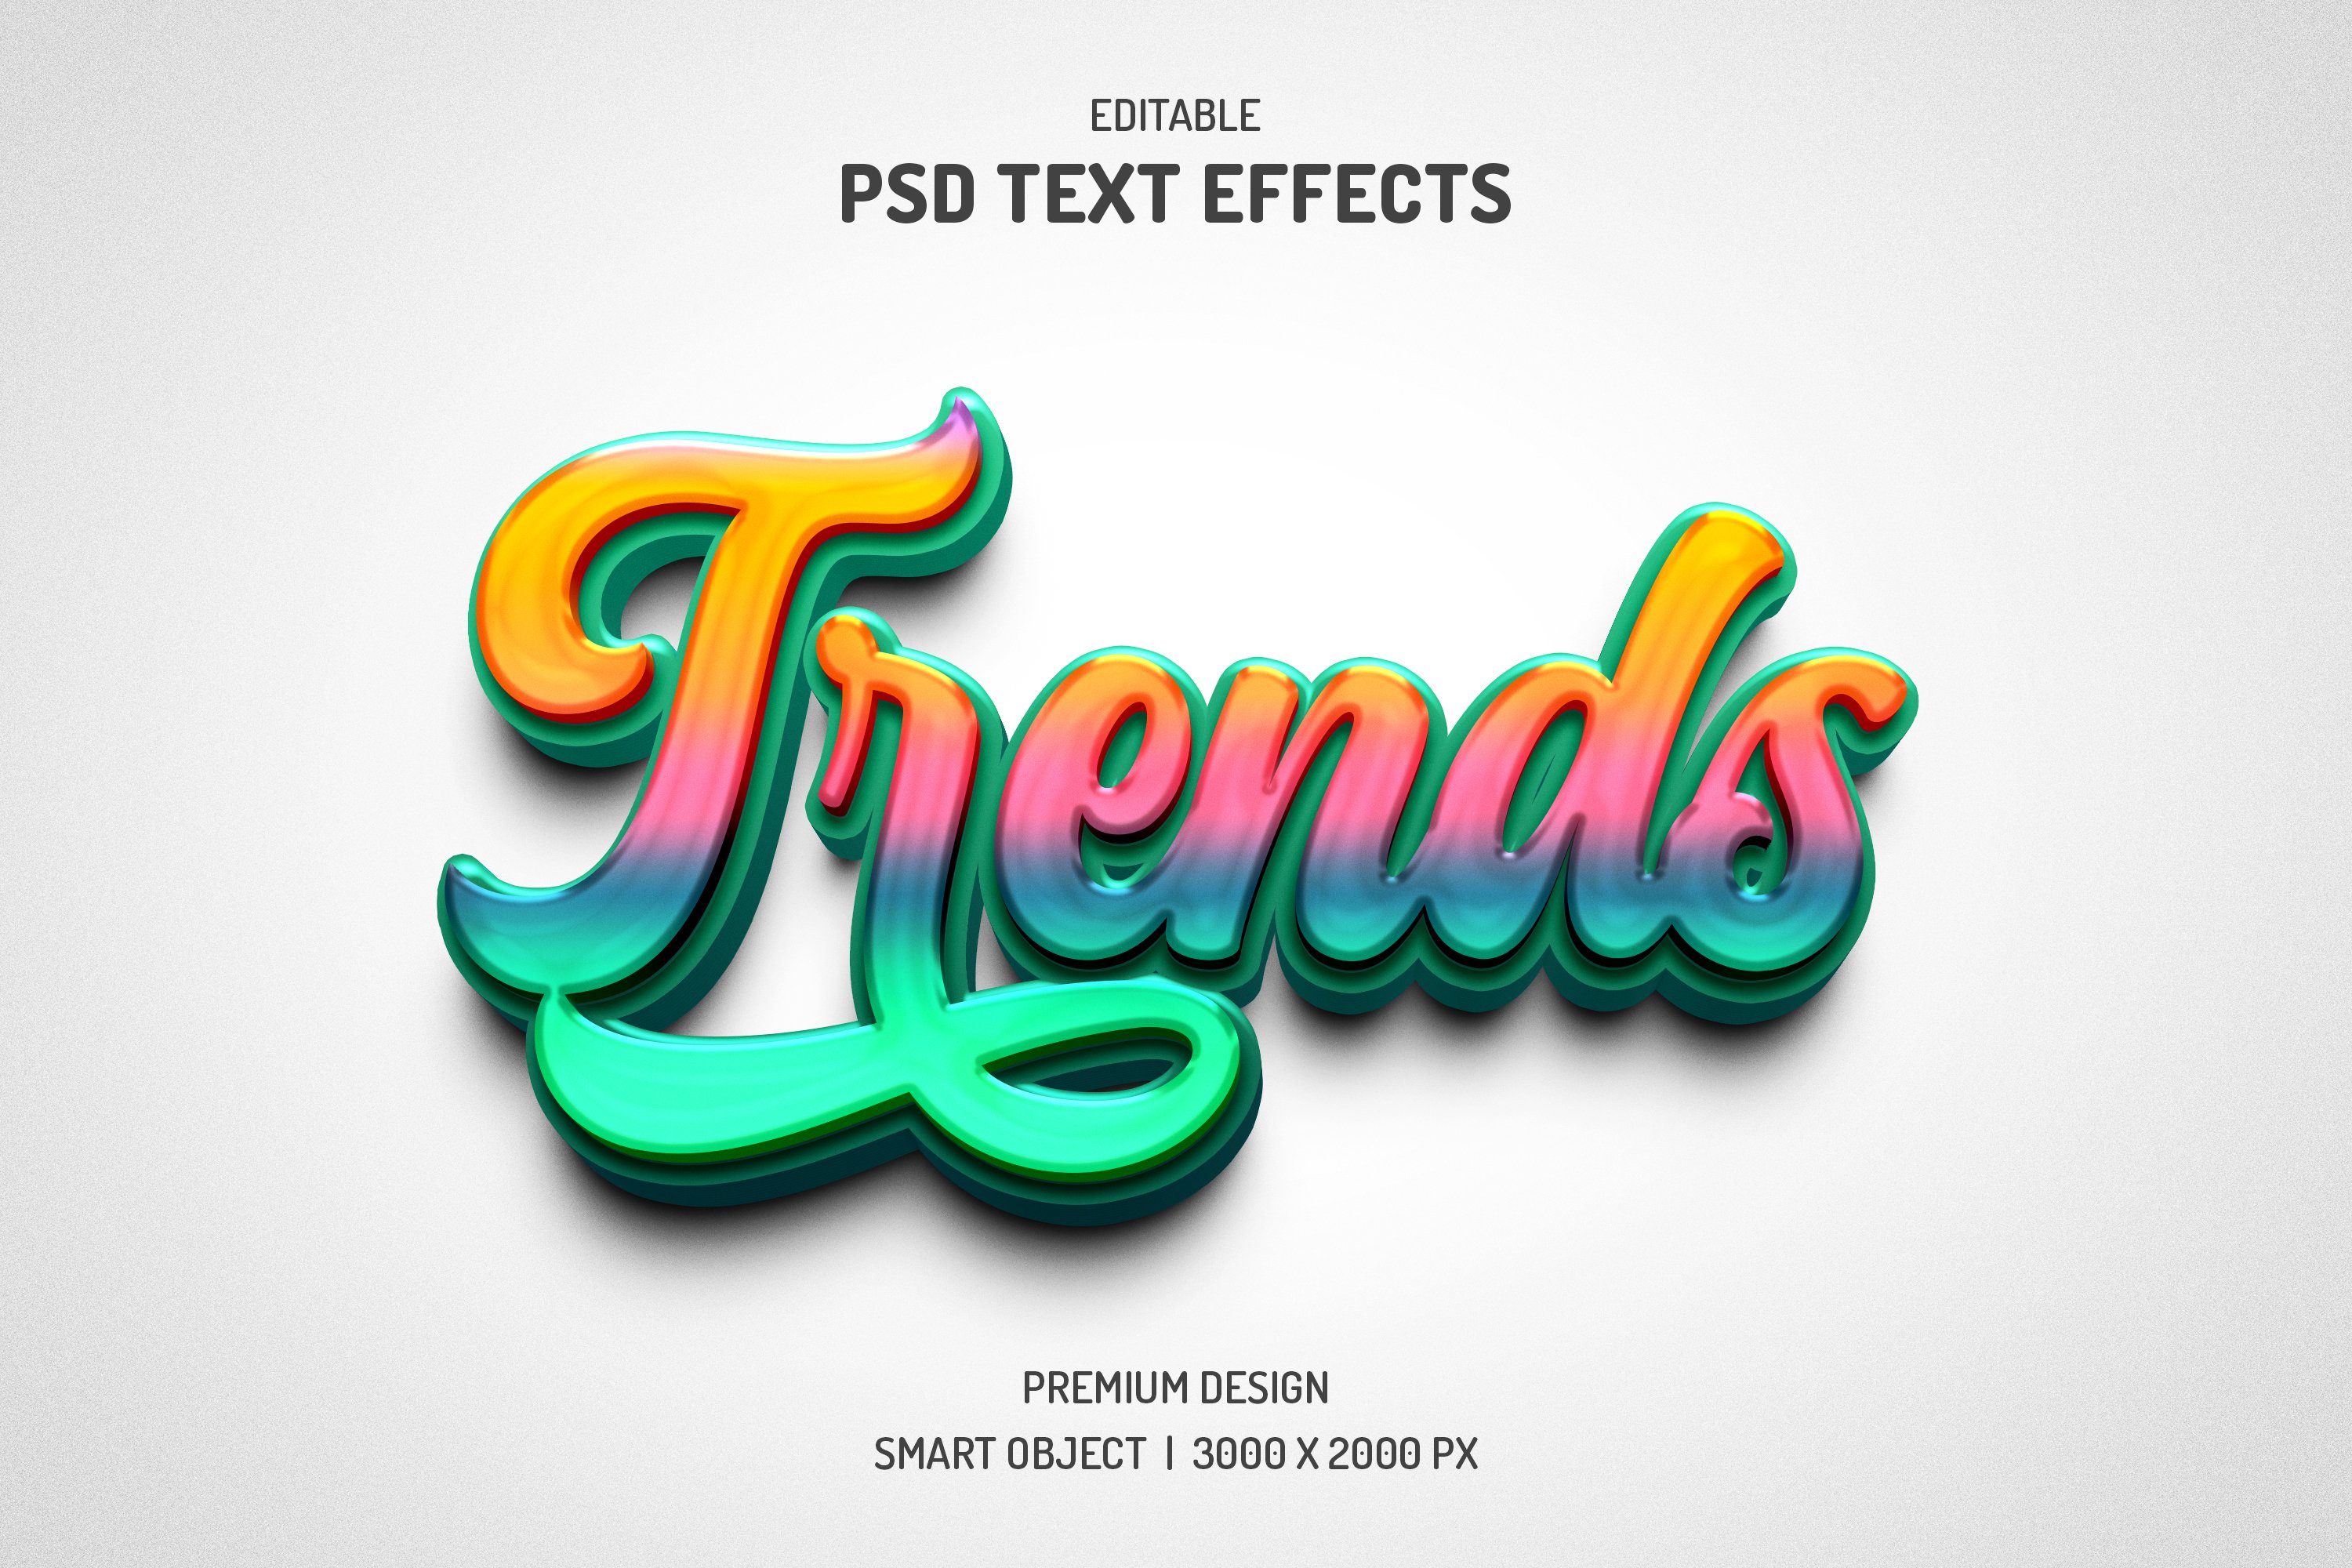 Photoshop Text Effect Packpreview image.